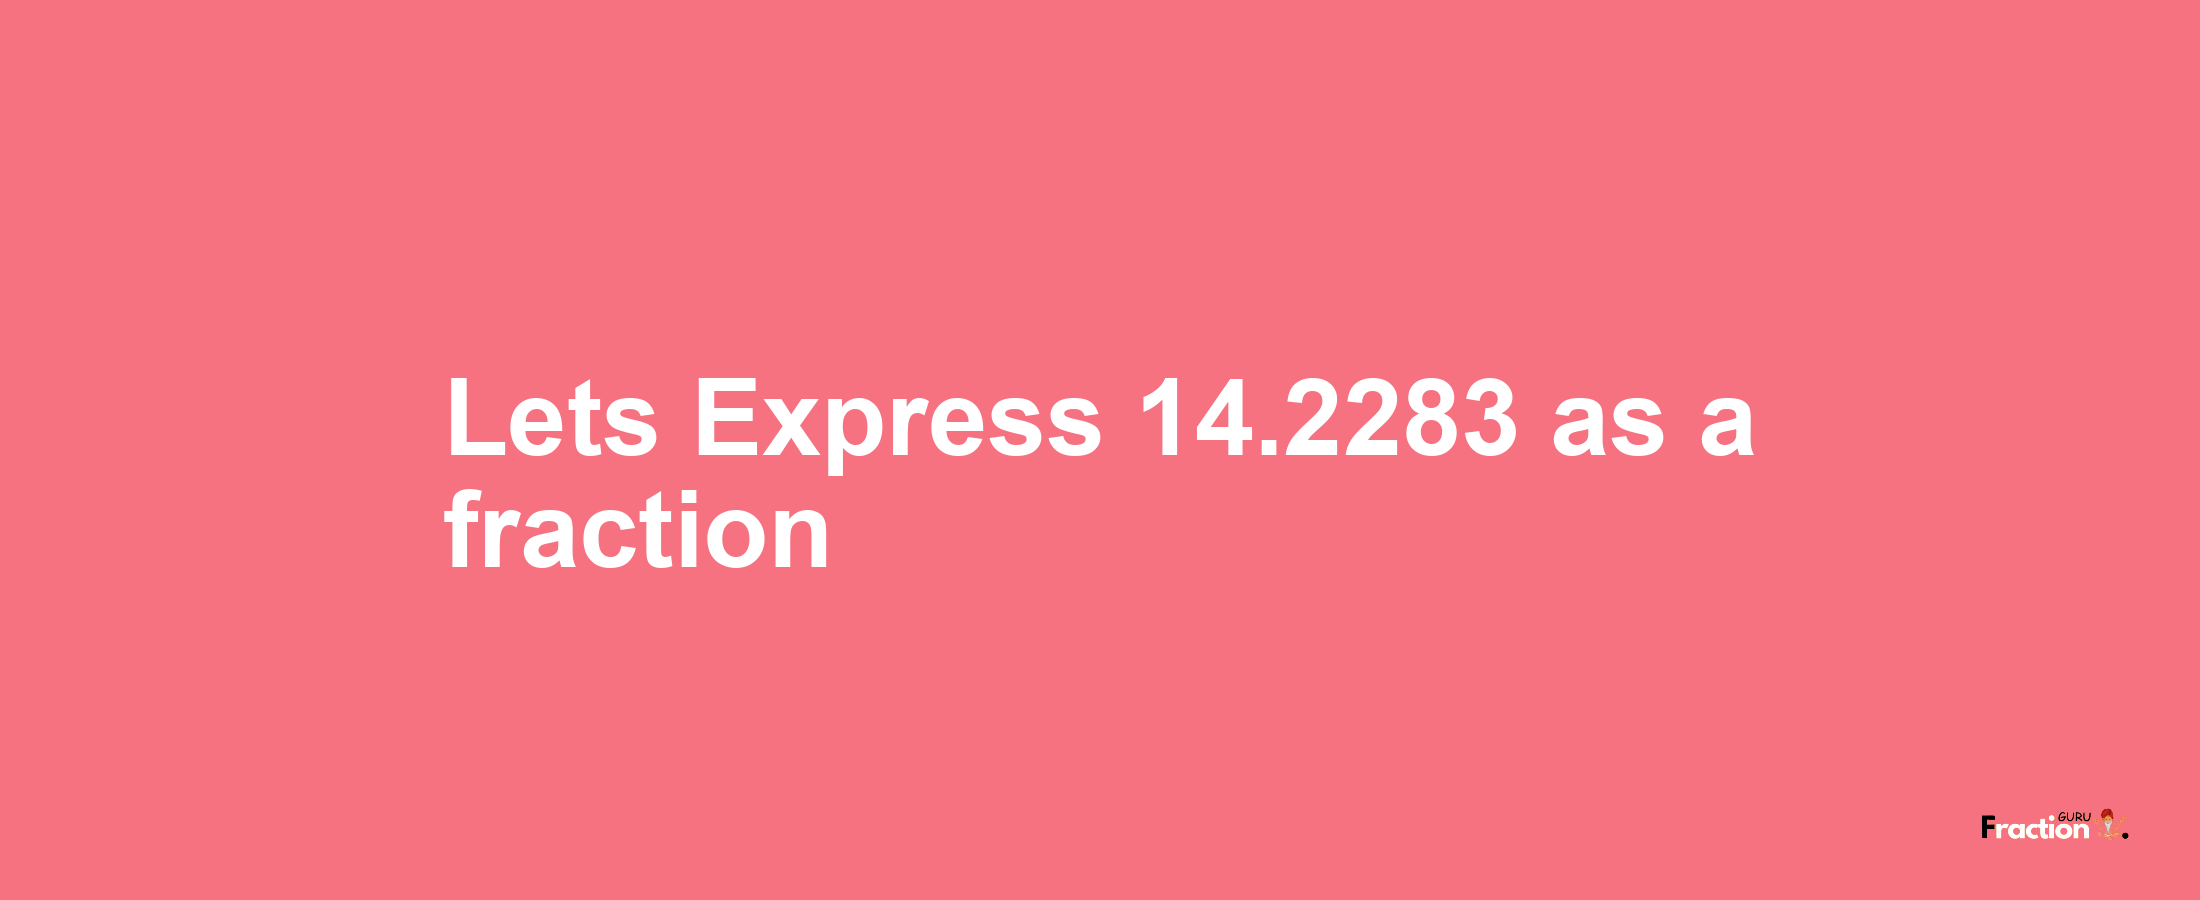 Lets Express 14.2283 as afraction